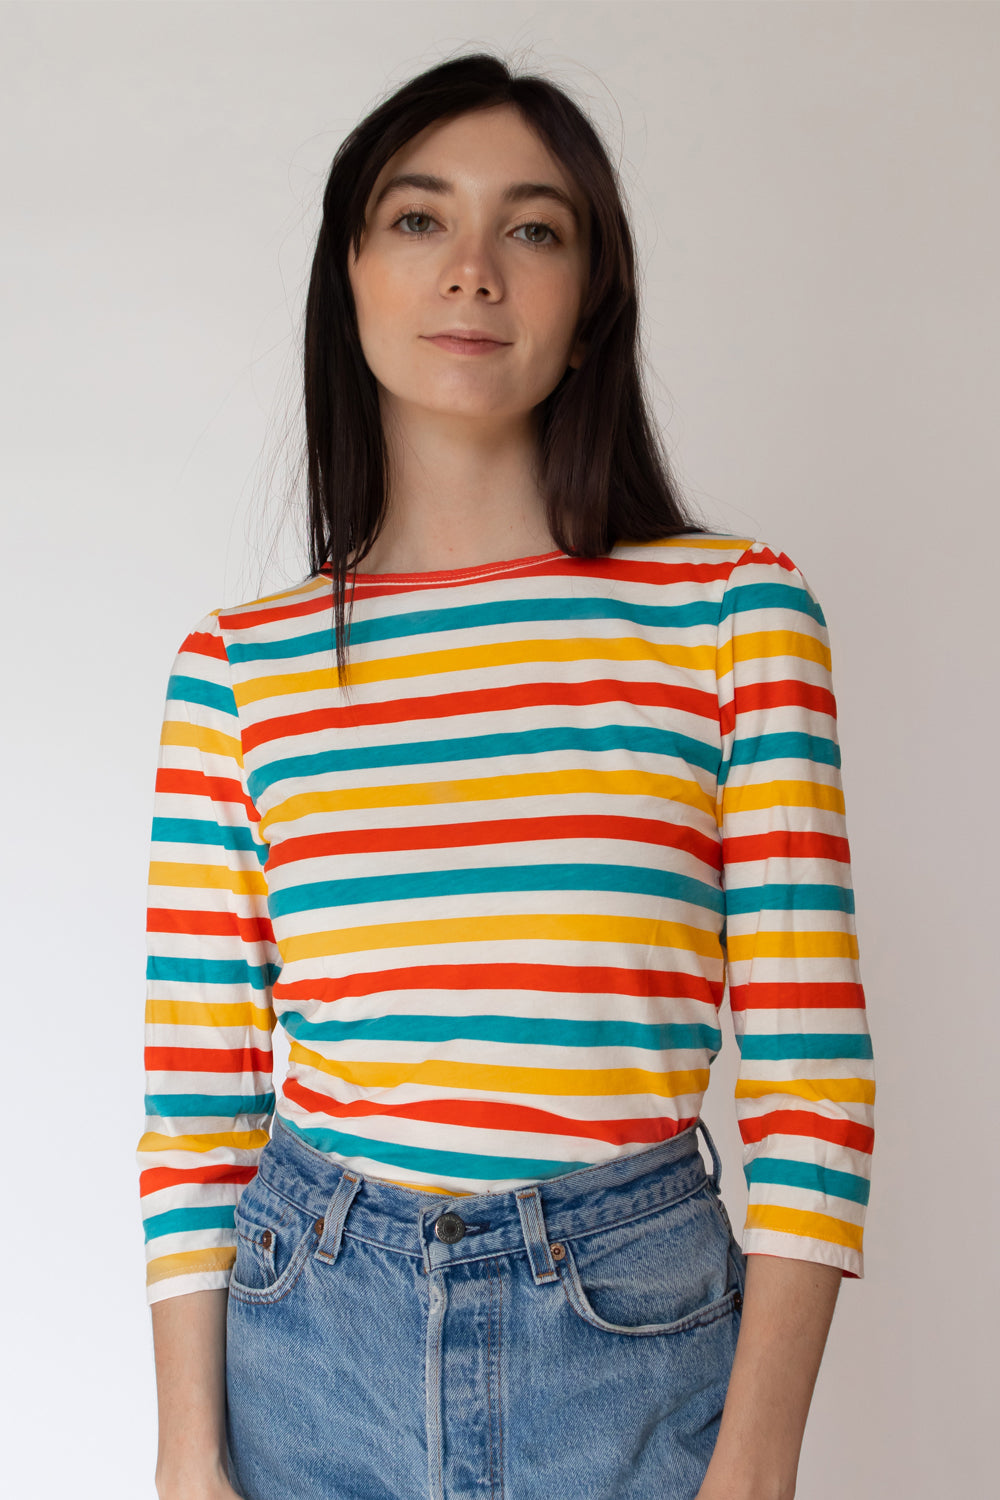 Dark-haired model in bright orange, yellow and blue 3/4 sleeved striped shirt